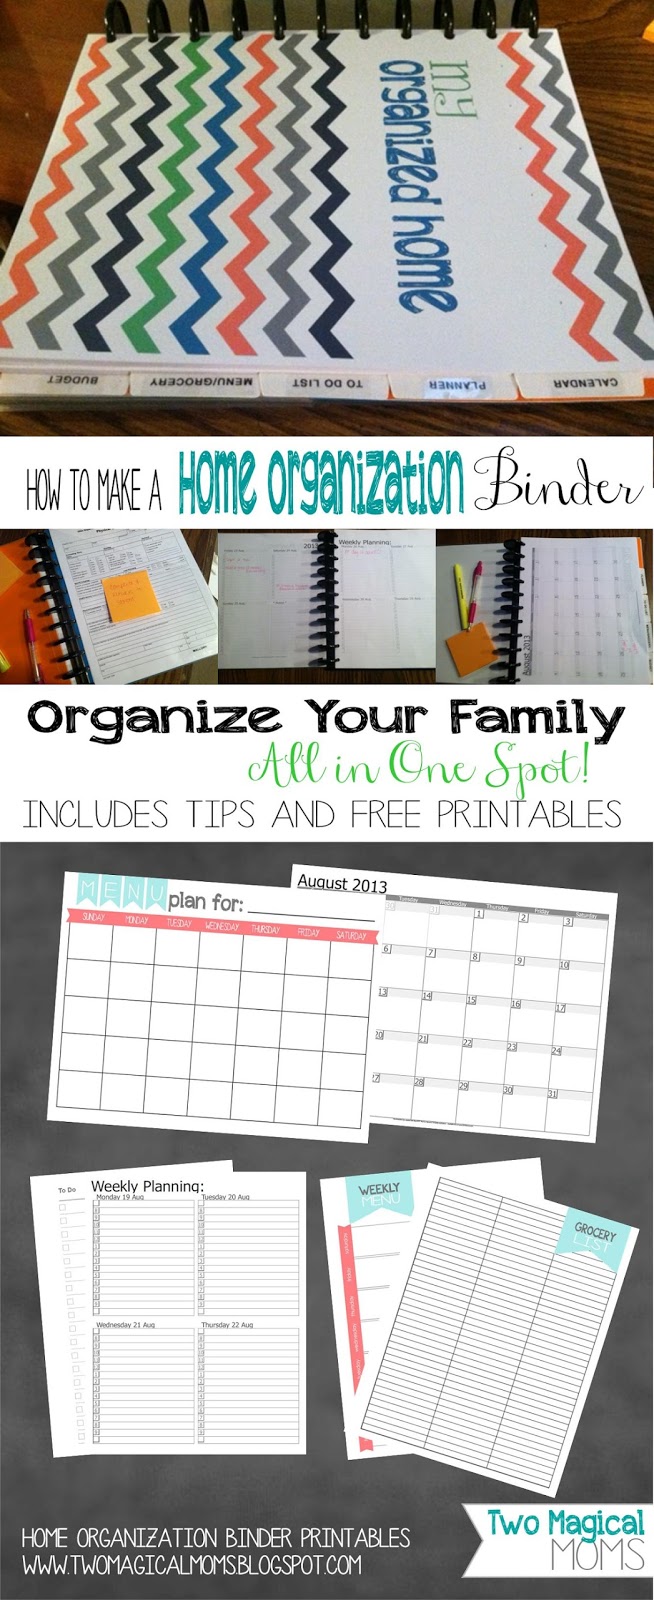 two-magical-moms-home-organization-binder-tips-and-free-printables